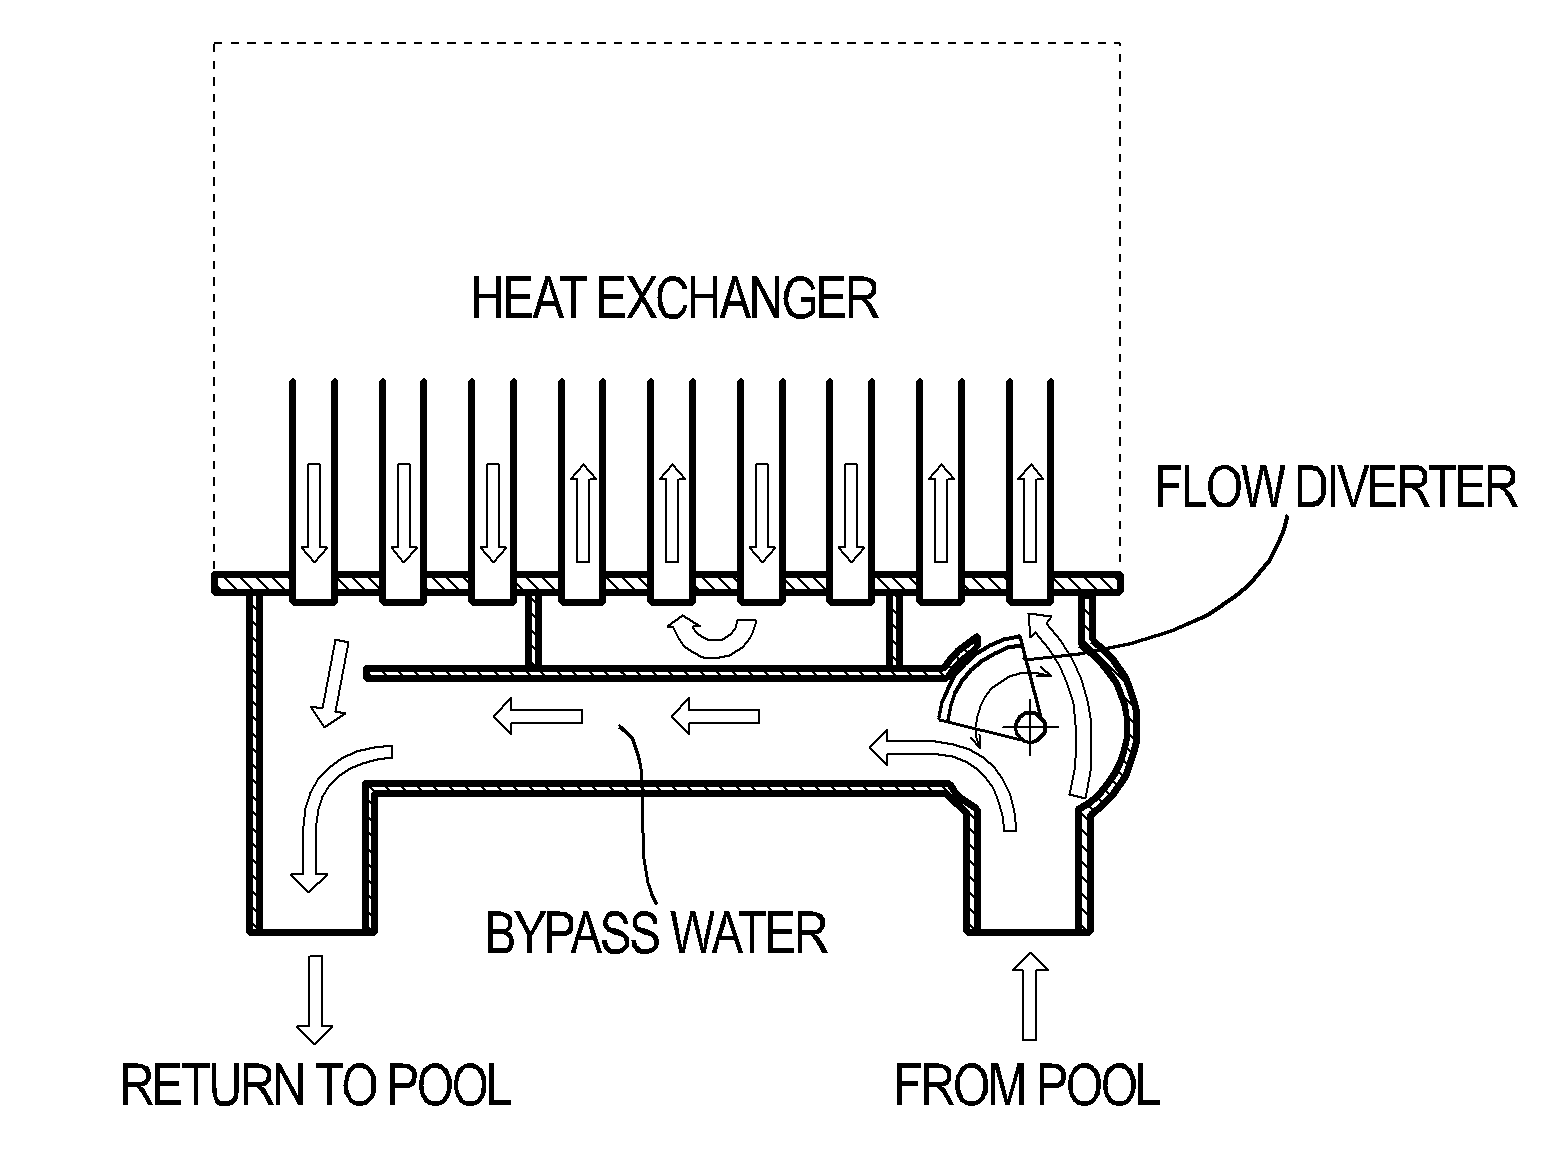 Flow control and improved heat rise control device for water heaters